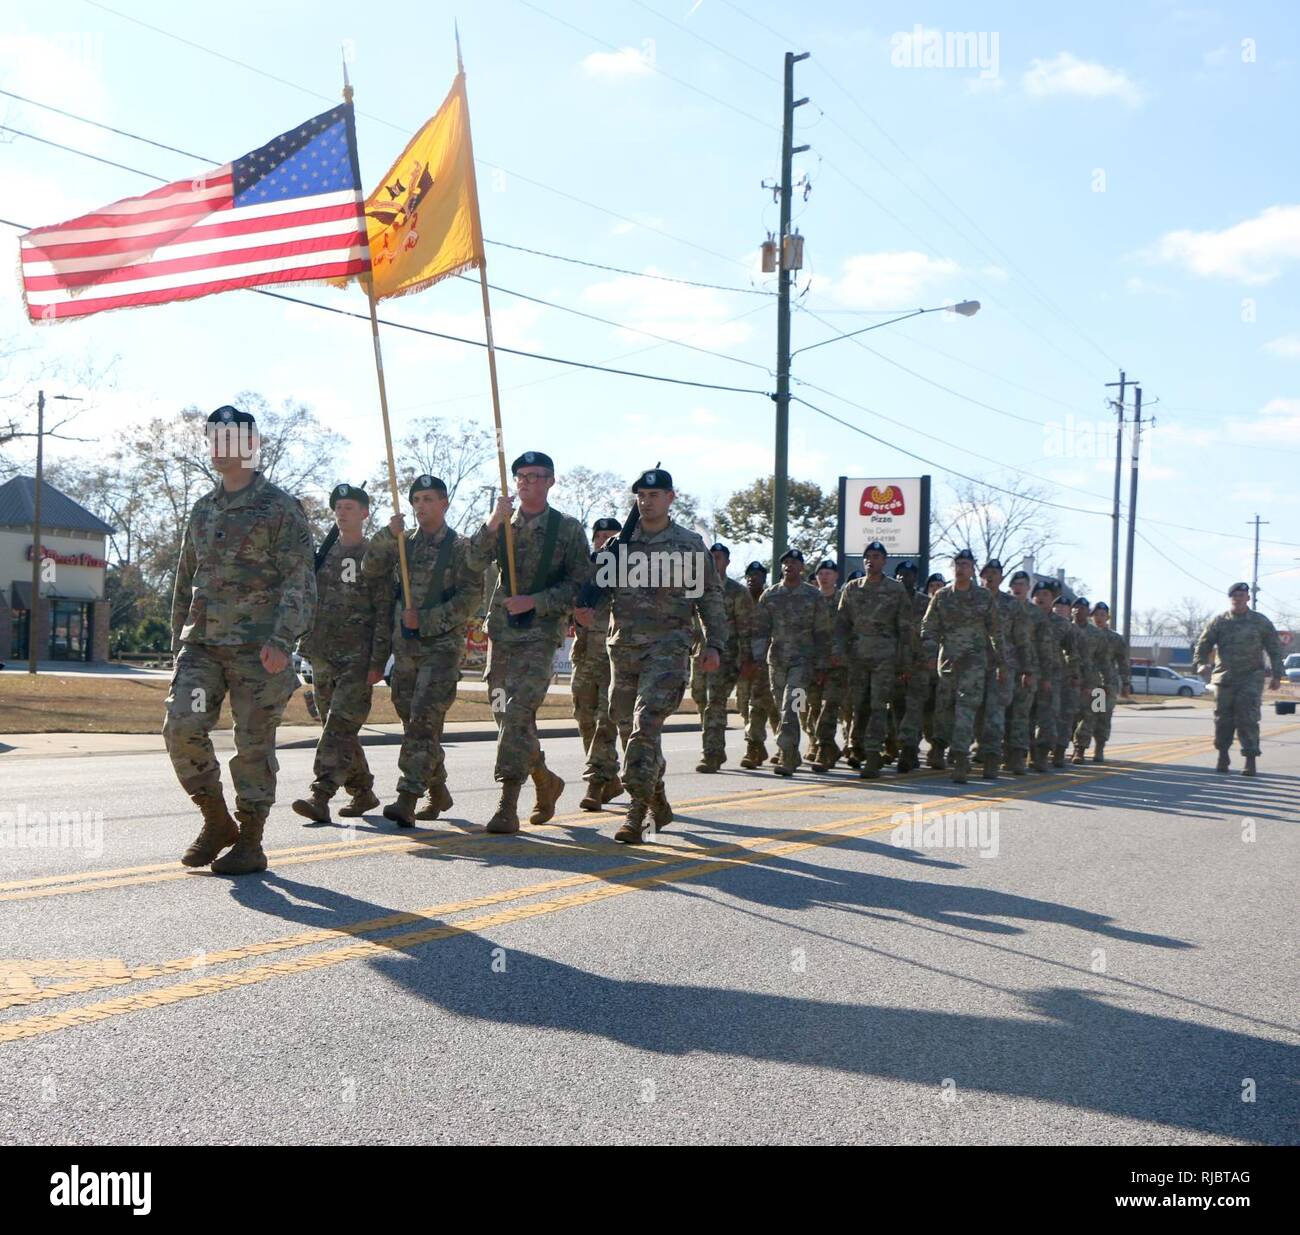 Lt. Col. Theodore Leonard, commander of 2nd Combined Arms Battalion, 69th Armor Regiment, 2nd Armored Brigade Combat Team, 3rd Infantry Division, leads his Soldiers while marching in this year’s Dr. Martin Luther King Jr. Day parade in Glennville, Ga., Jan. 13, 2018. Each year on the third Monday in January,  the United States commemorates the life, legacy, and dream of Dr. King, one of the nation’s most respected leaders. Stock Photo